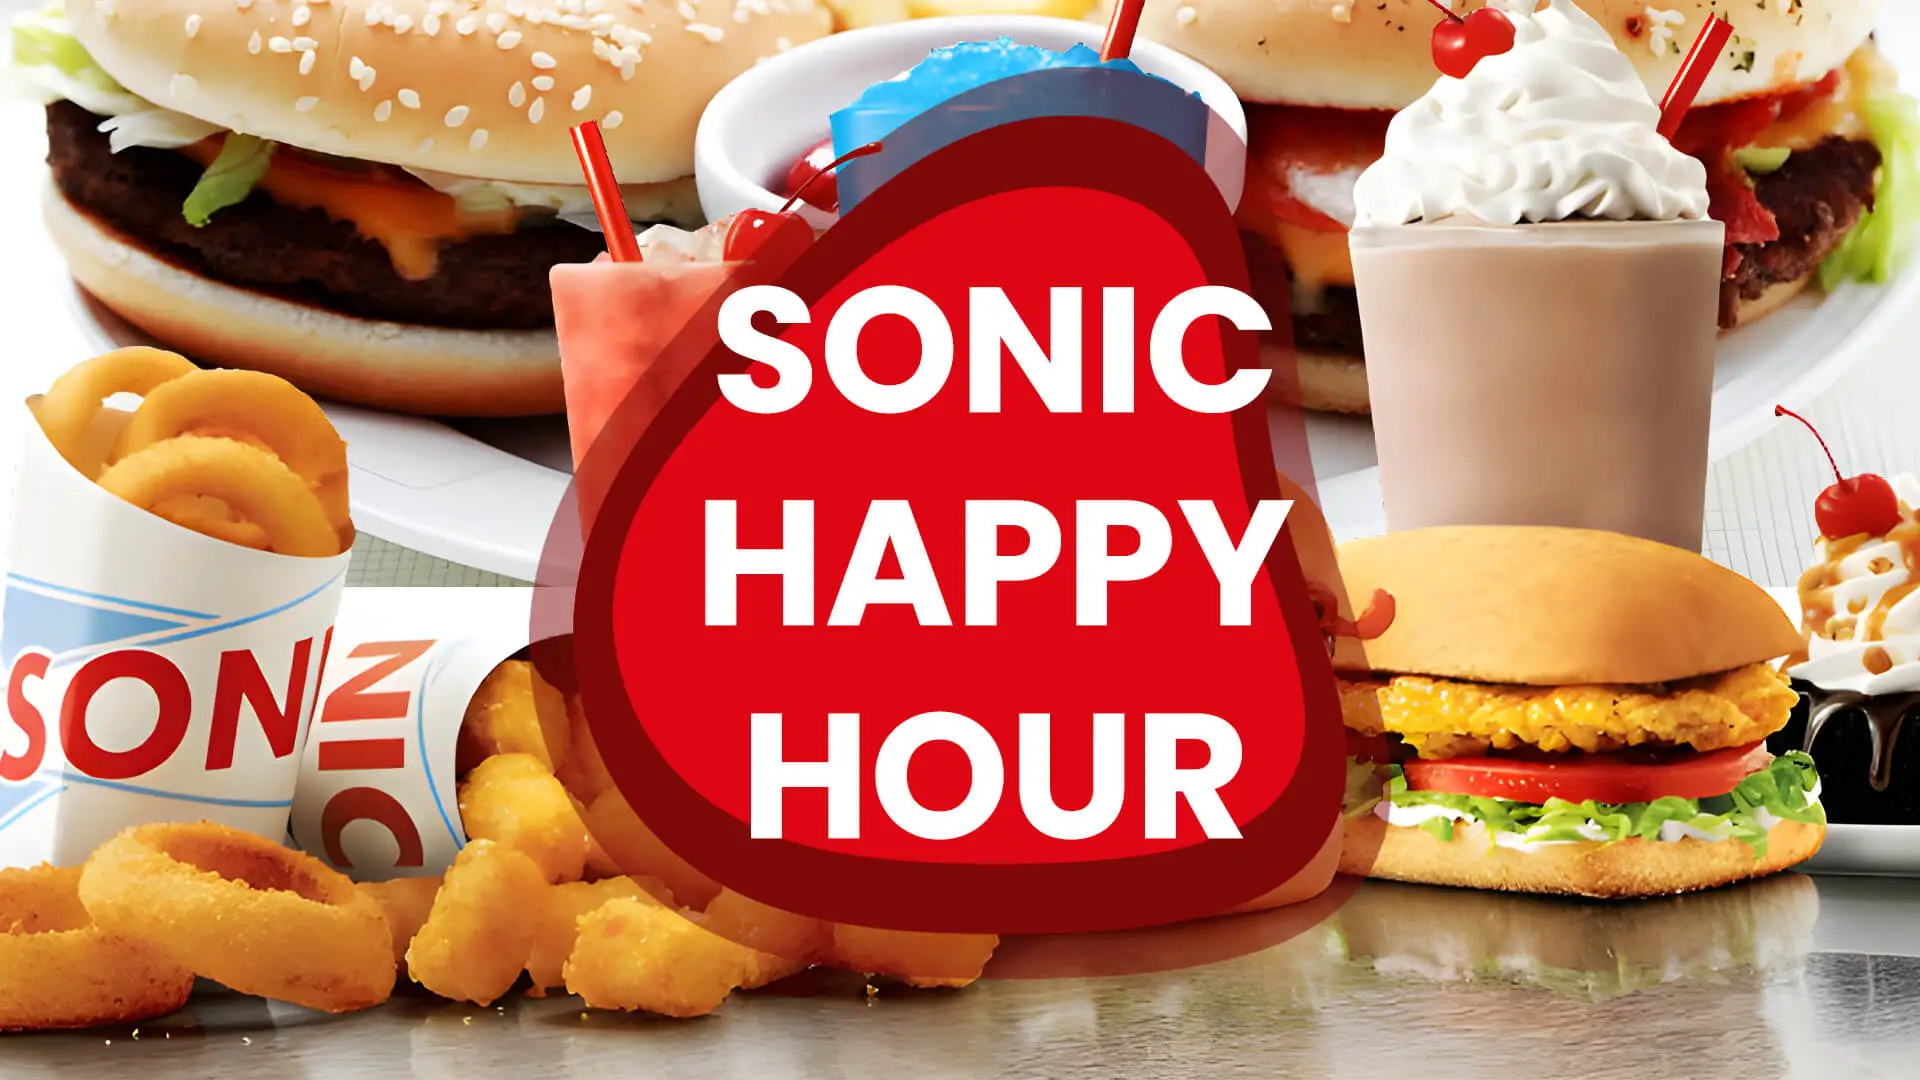 Sonic-Dr Pepper Happy Hour Snacks Wrapcover (DP1014-Sonic) – wrapcovers